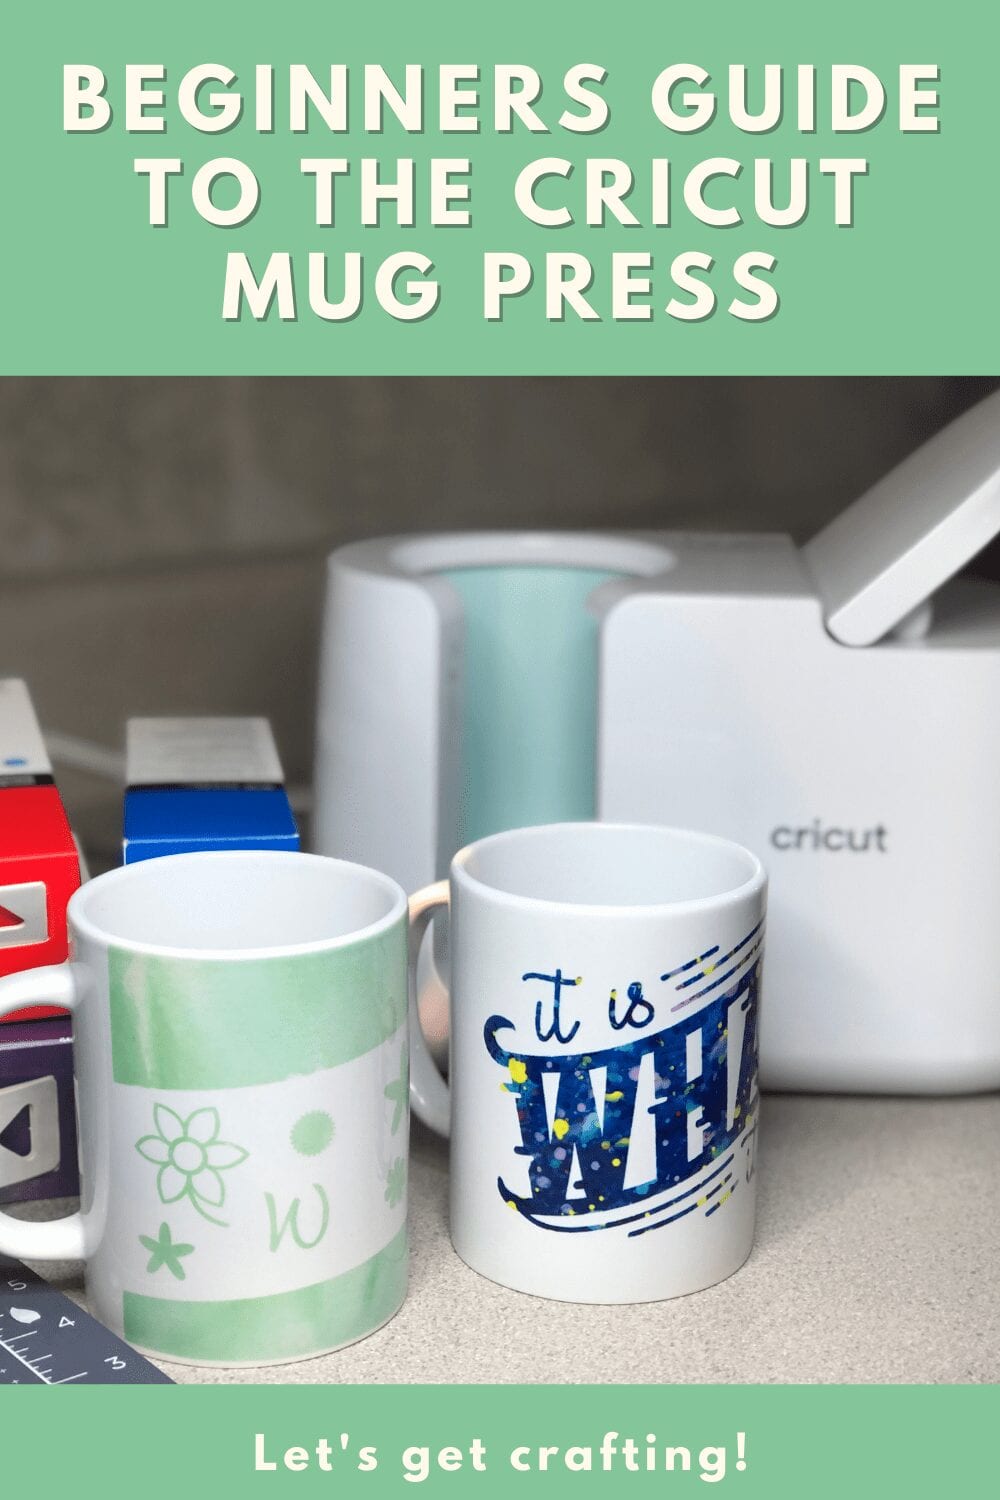 How to Make Mugs with the Cricut Mug Press and Infusible Ink